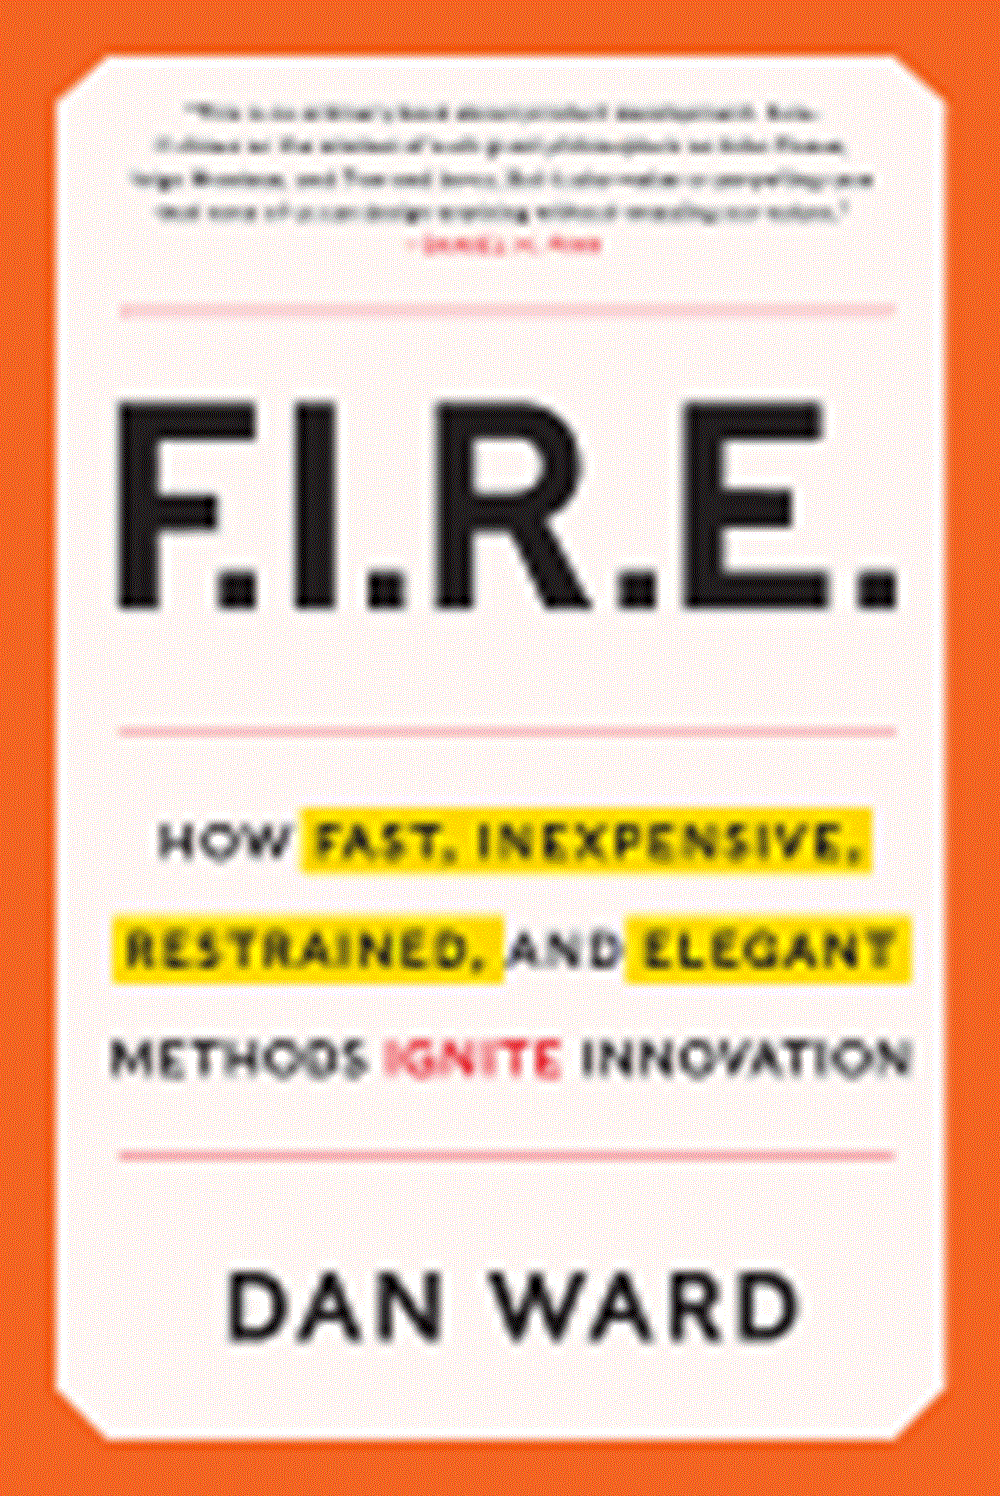 Fire How Fast, Inexpensive, Restrained, and Elegant Methods Ignite Innovation